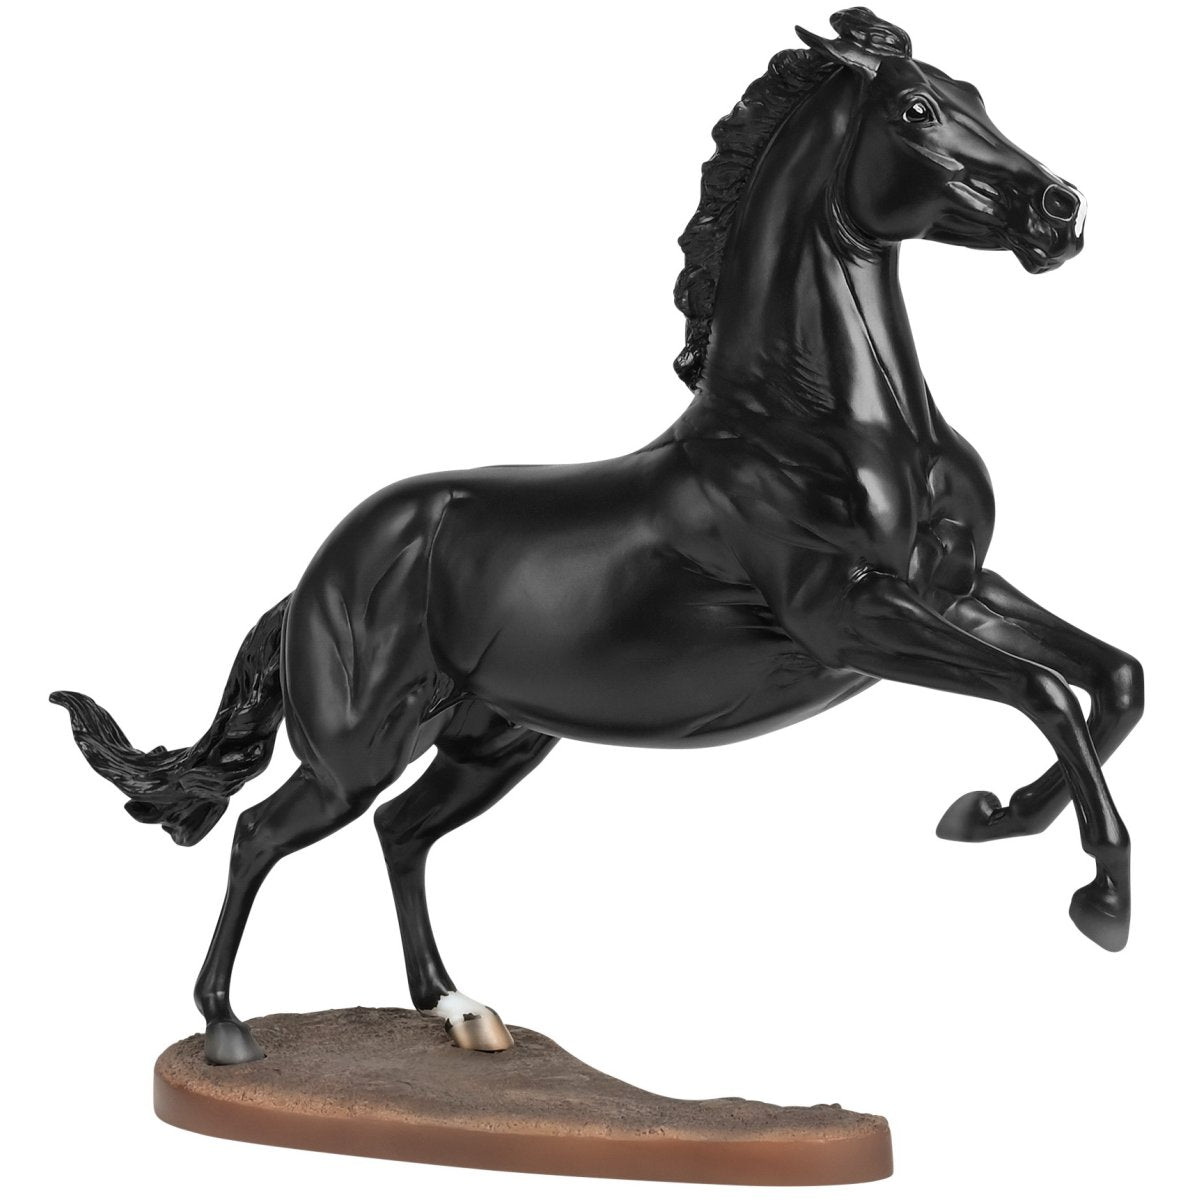 ATP Power-Amberly Snyder's Horse-Action Stock Horse Mold-Breyer Traditional